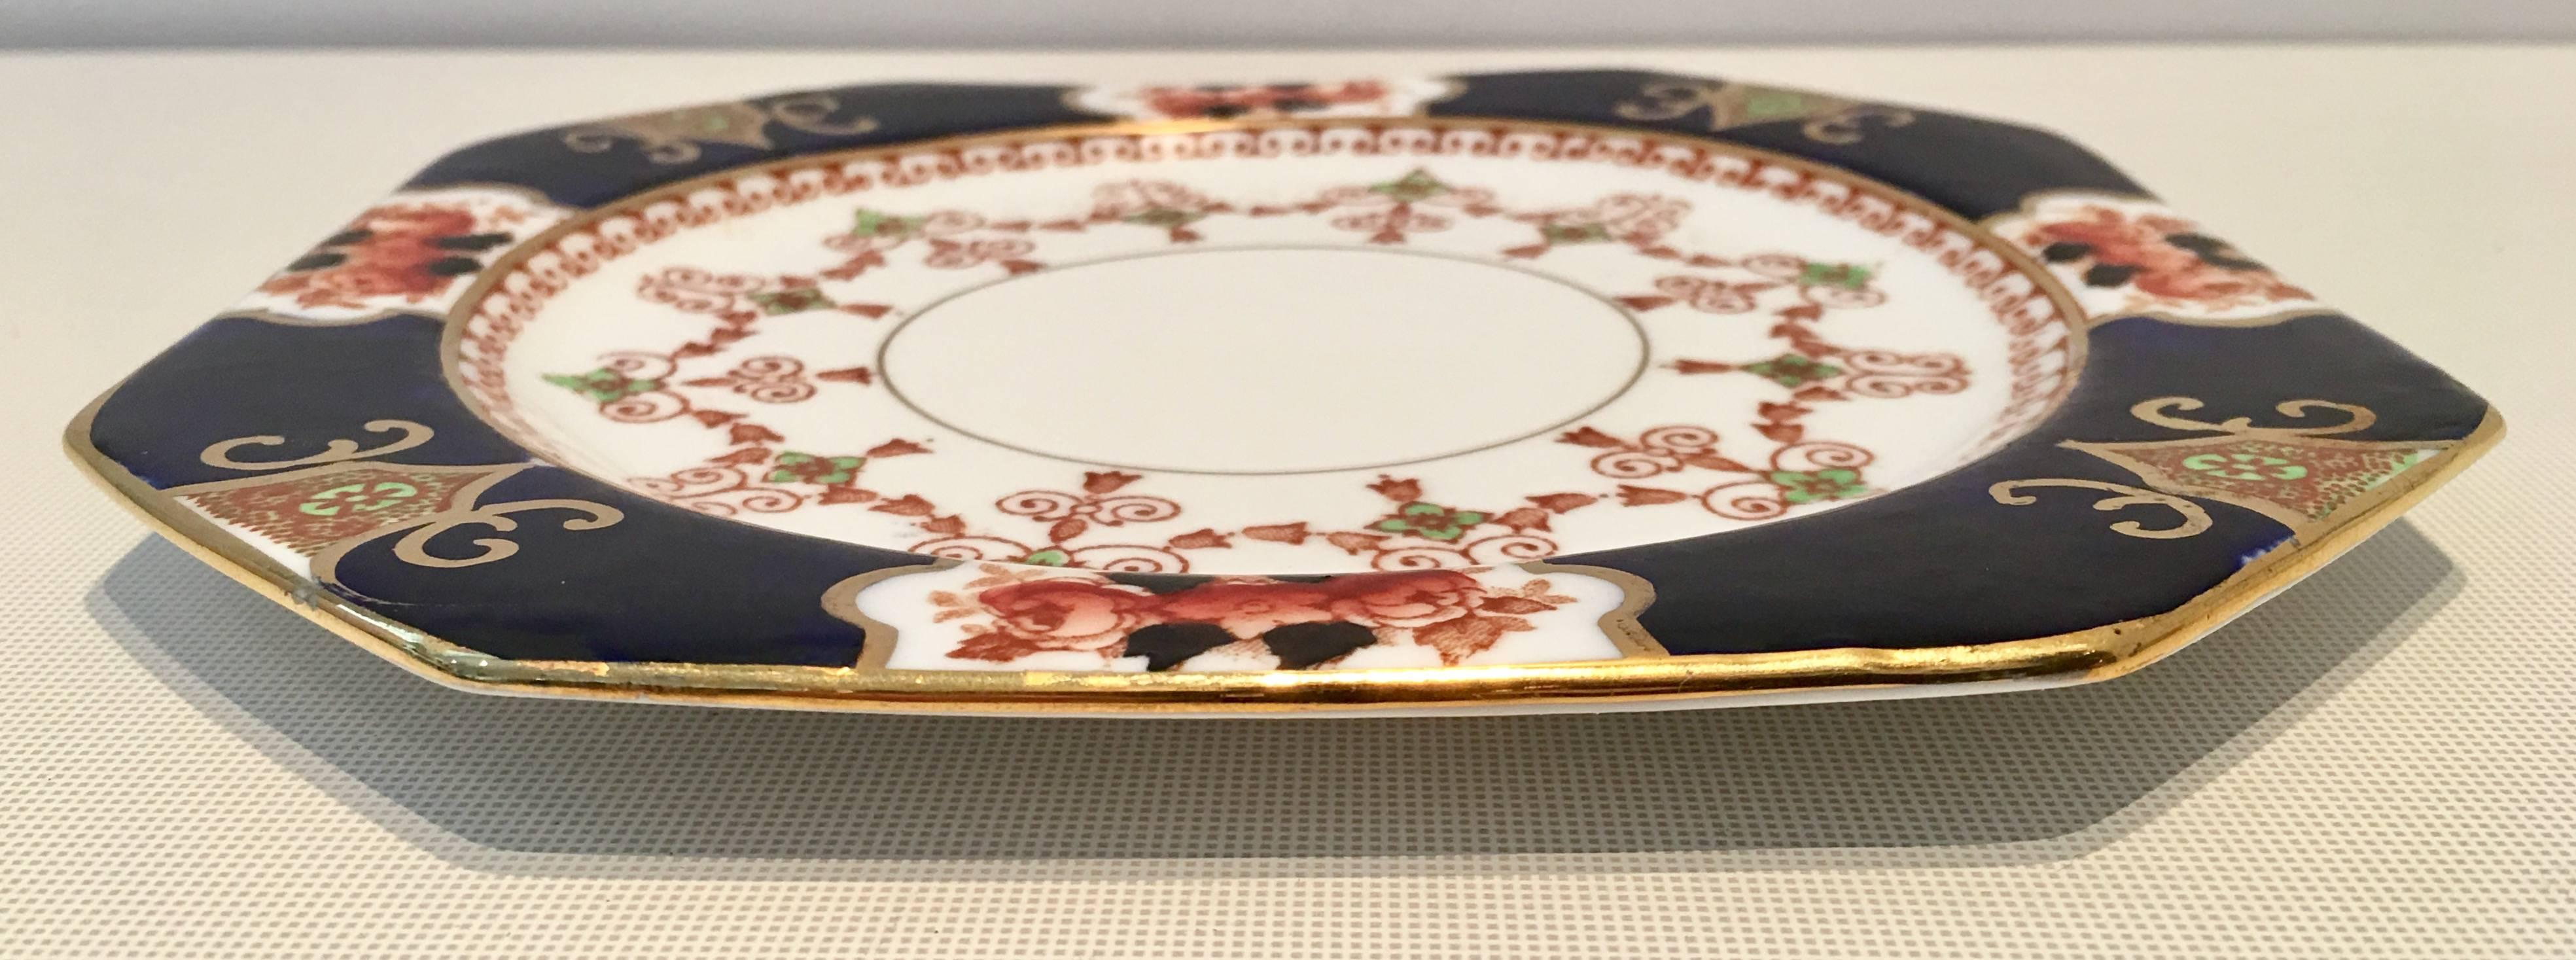 Rare hexagon shaped English royal Stafford bone china pattern # 2843 Art Nouveau cobalt rust and green on a white ground with 22-carat gold detail. Each piece is hand-painted and signed, guaranteed English bone china royal Stafford made in England